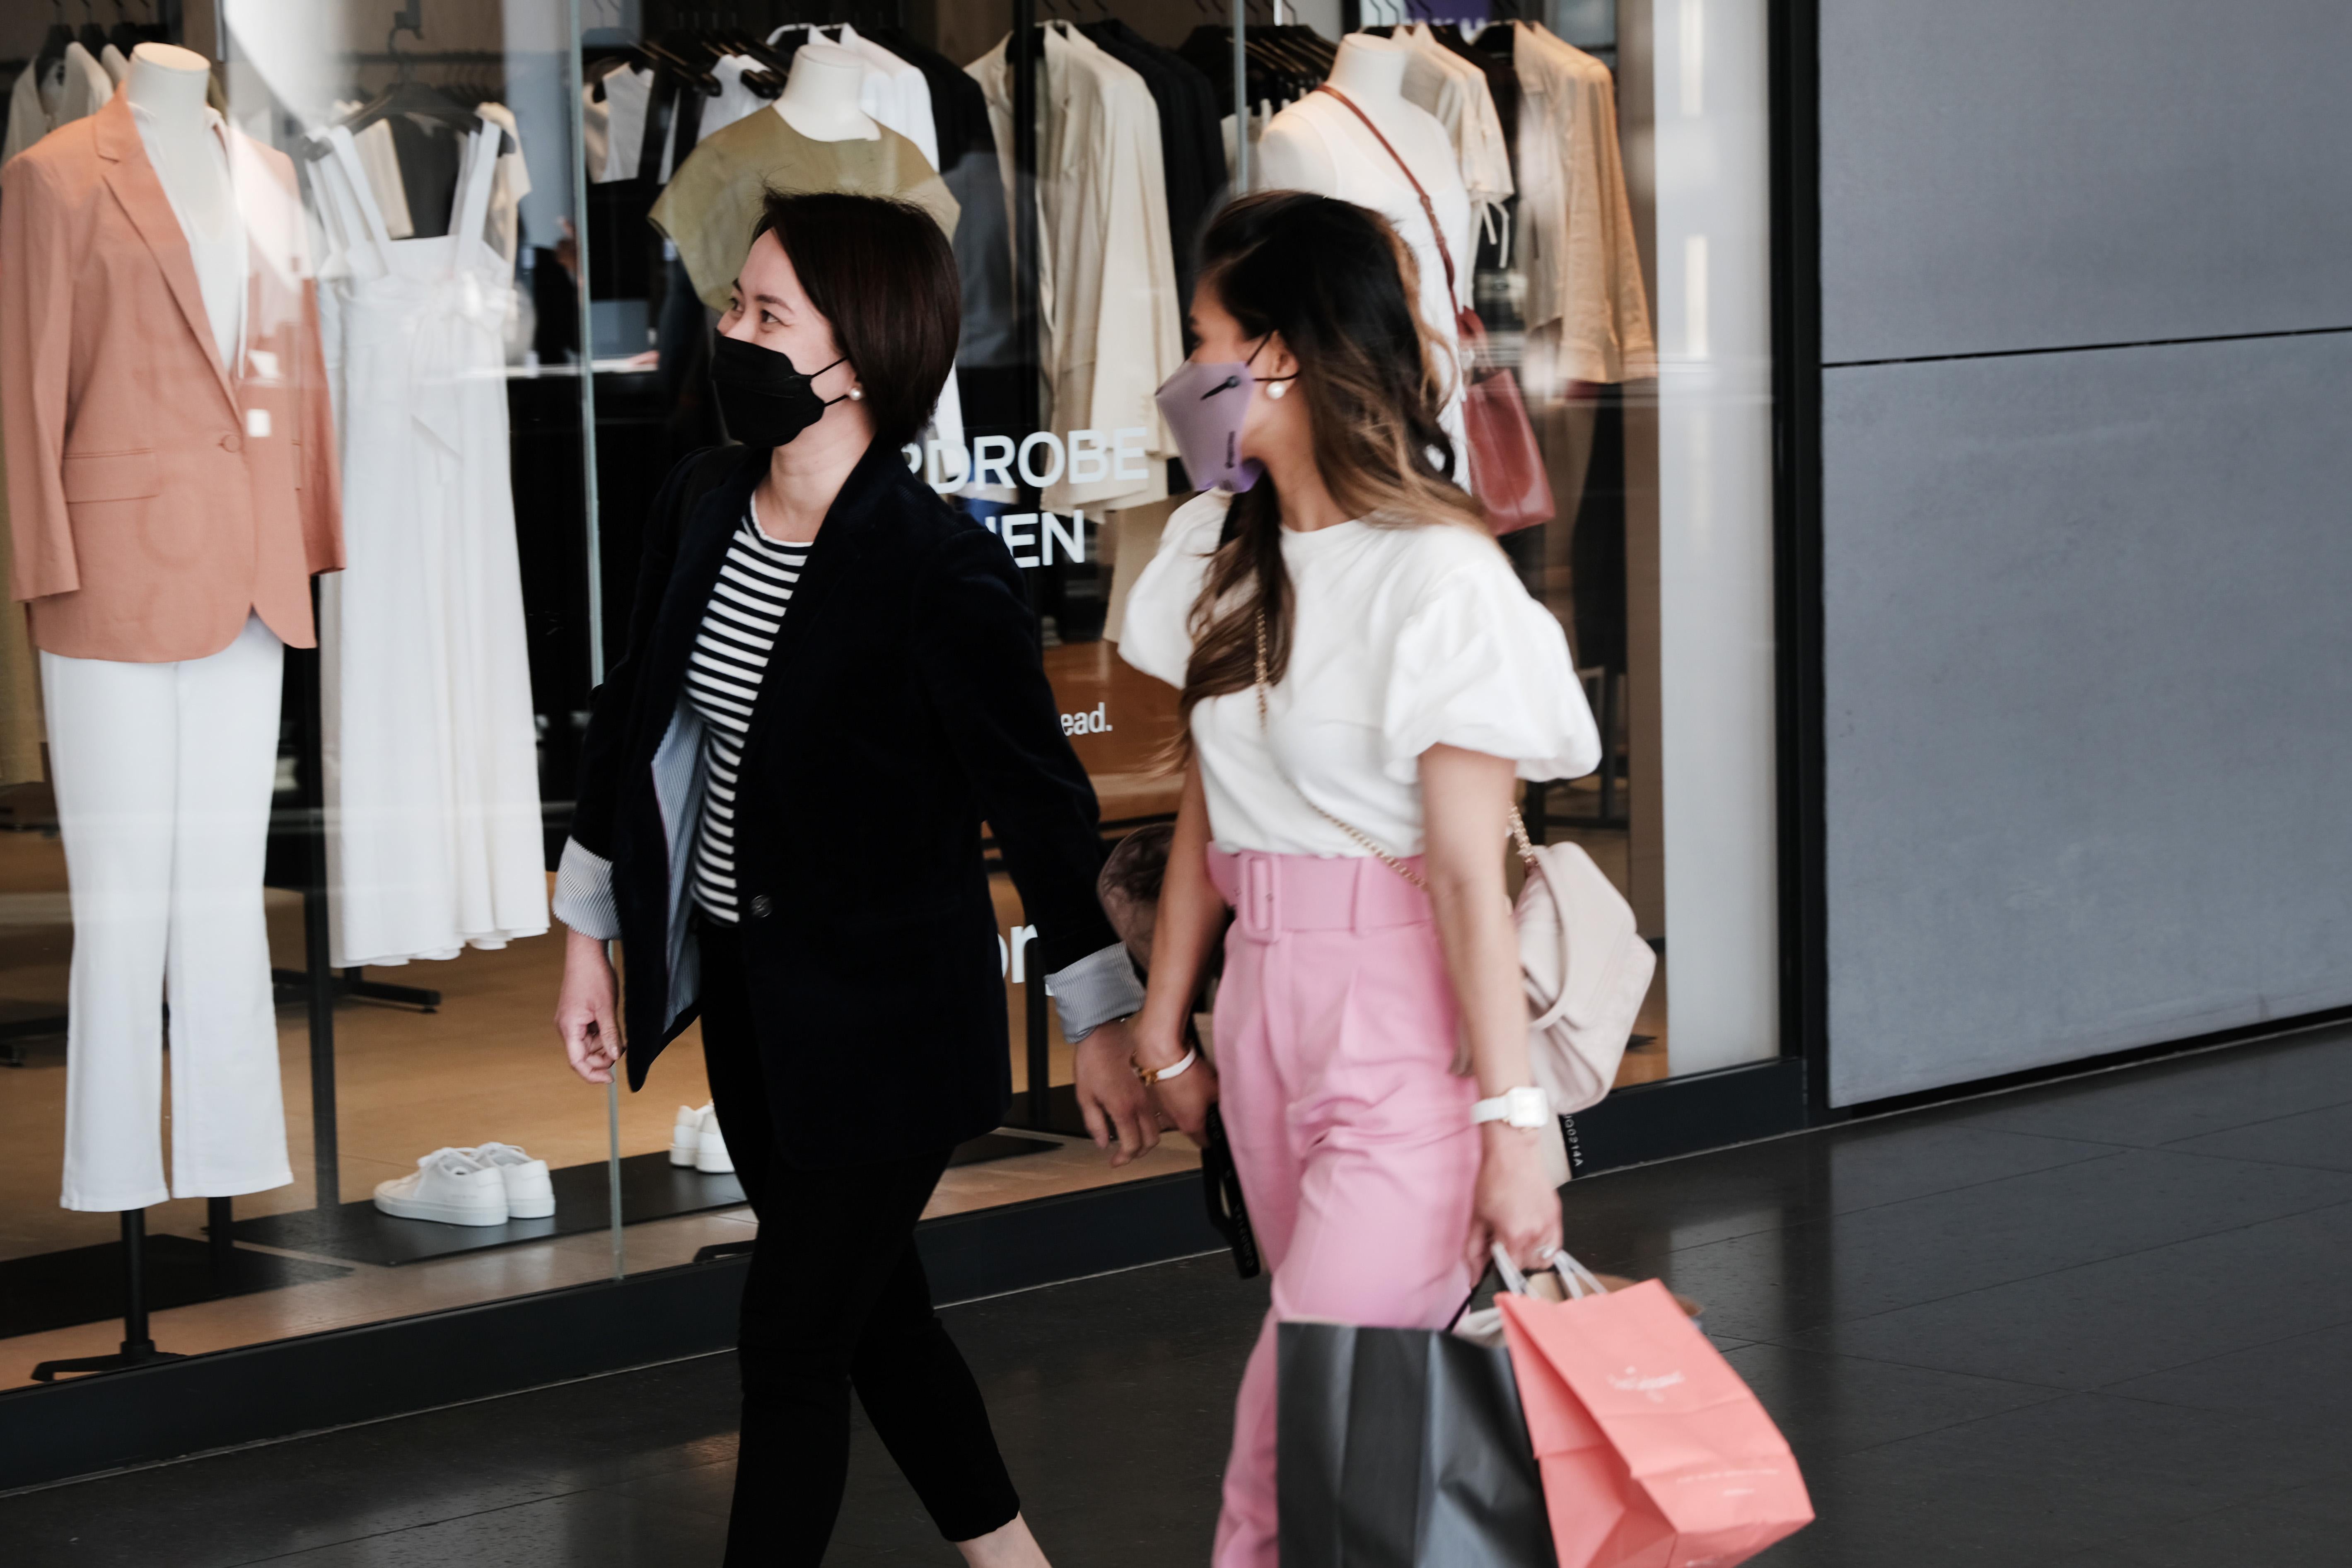 Two women in masks walk through a mall with shopping bags.